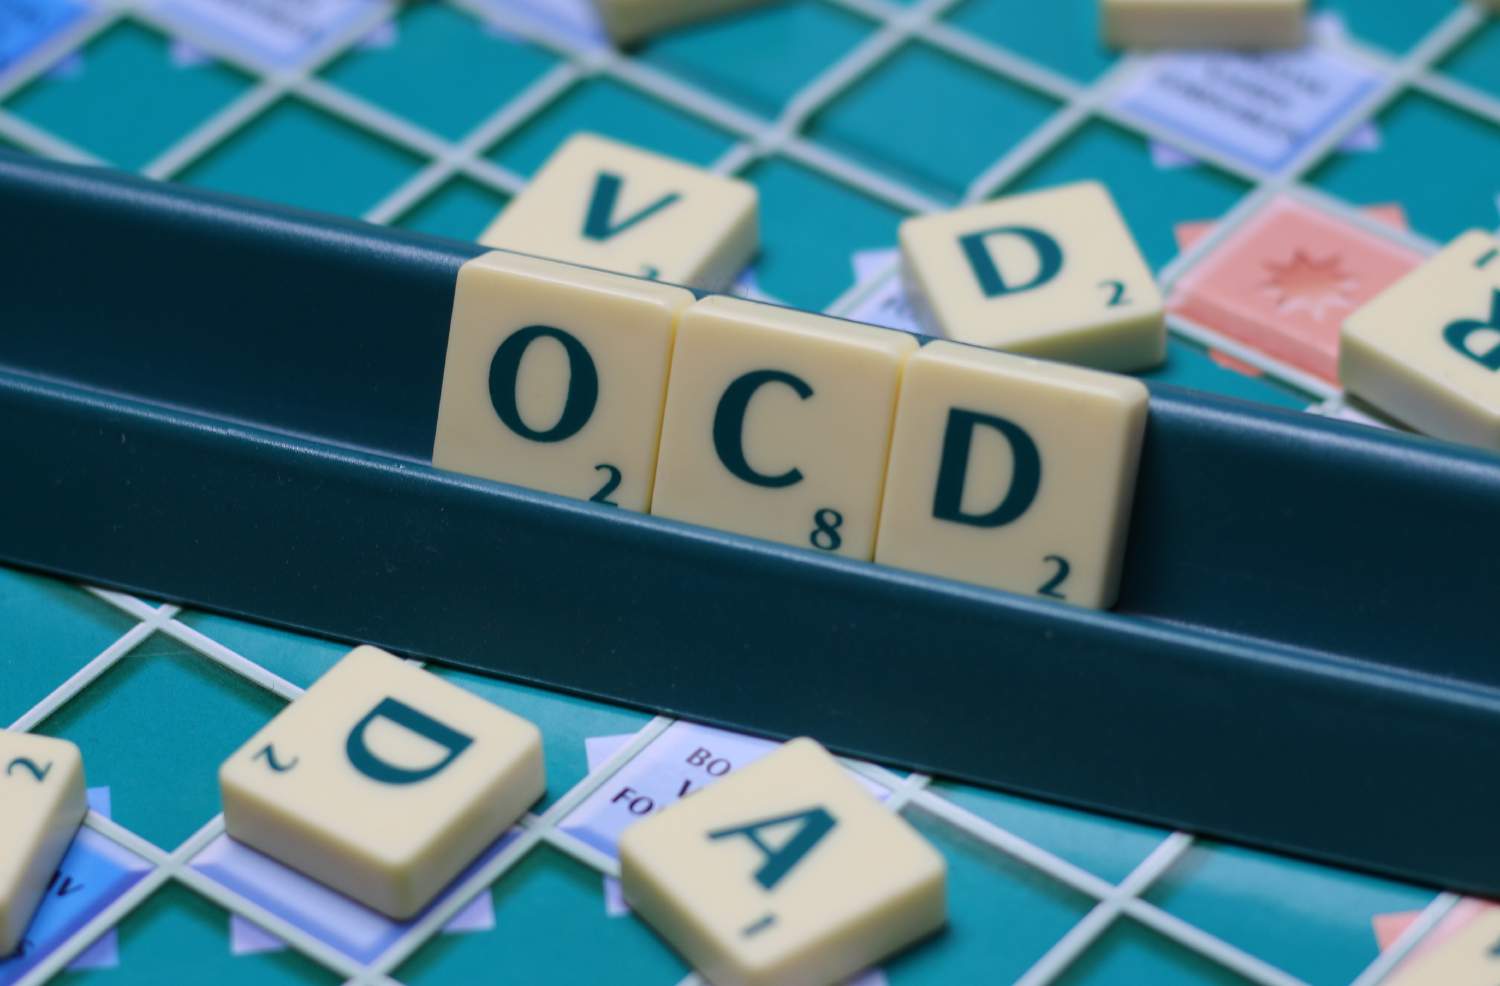 'OCD' is not a term to be used casually